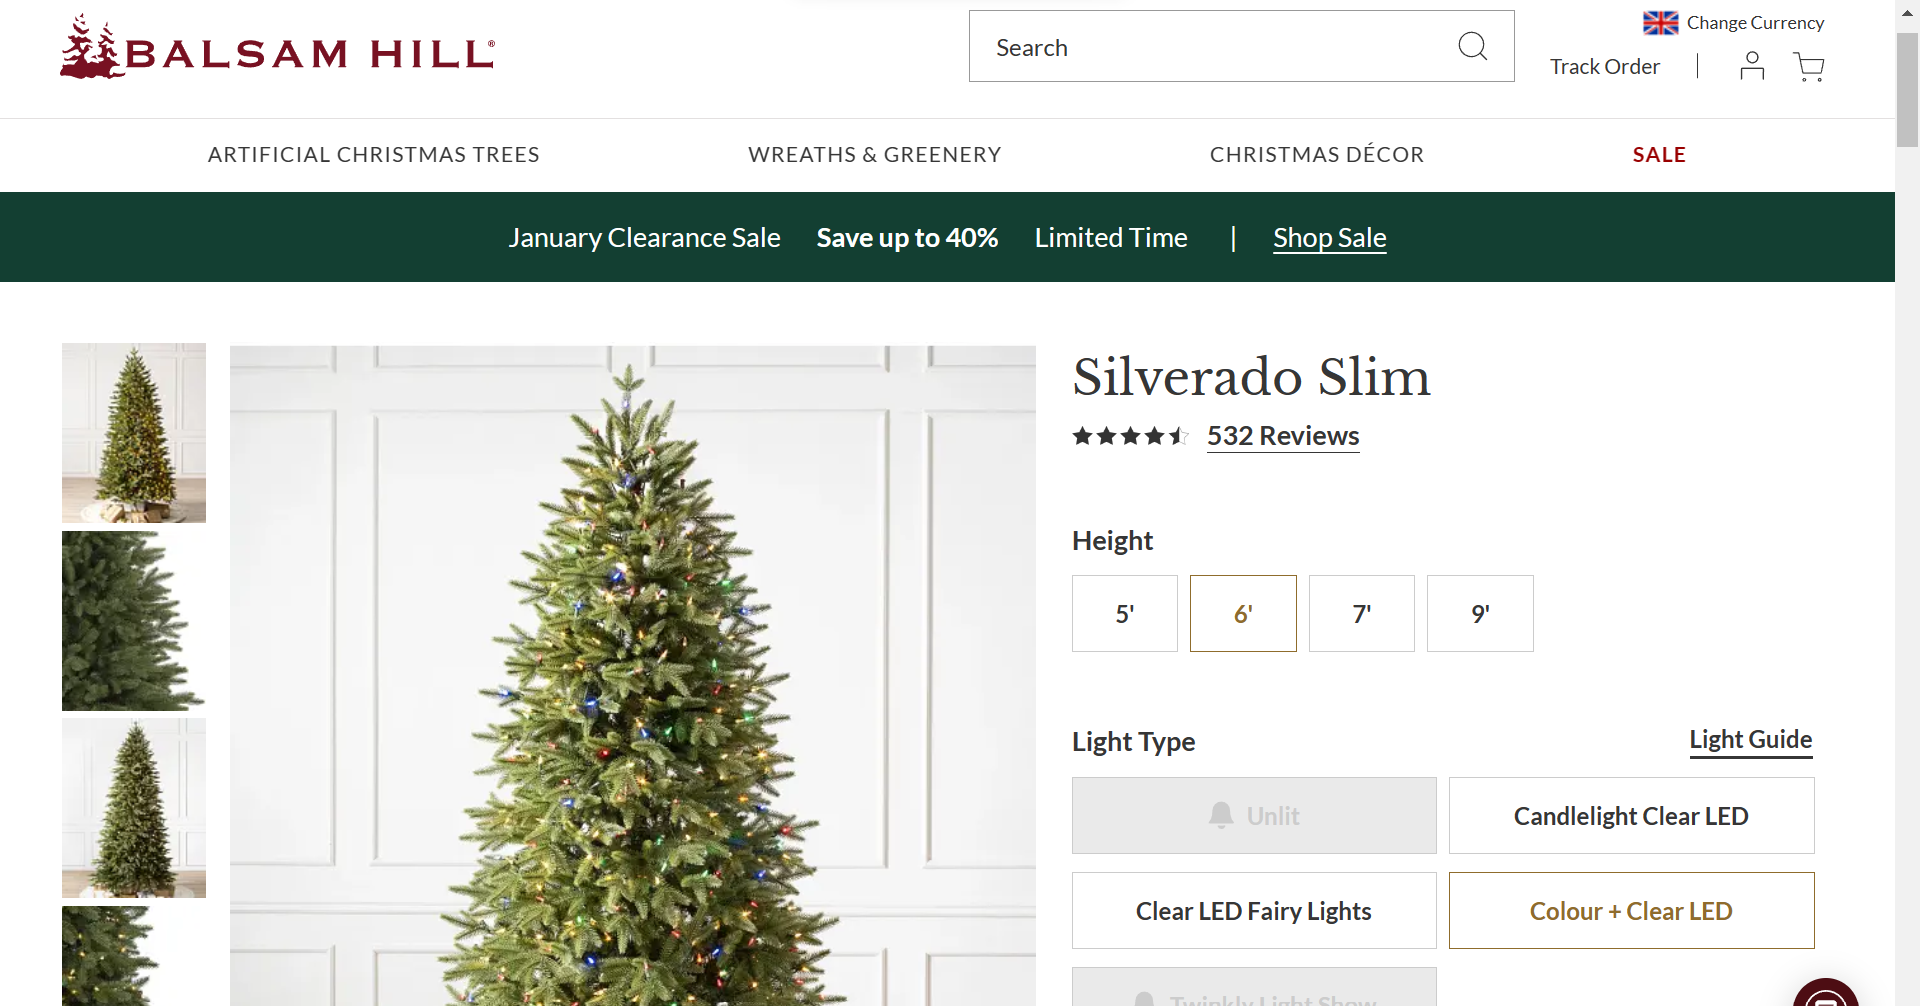 BH (The worlds leading Christmas Trees) Silverado Slim 6ft with LED Colour and CLear LED Lights - Image 2 of 2